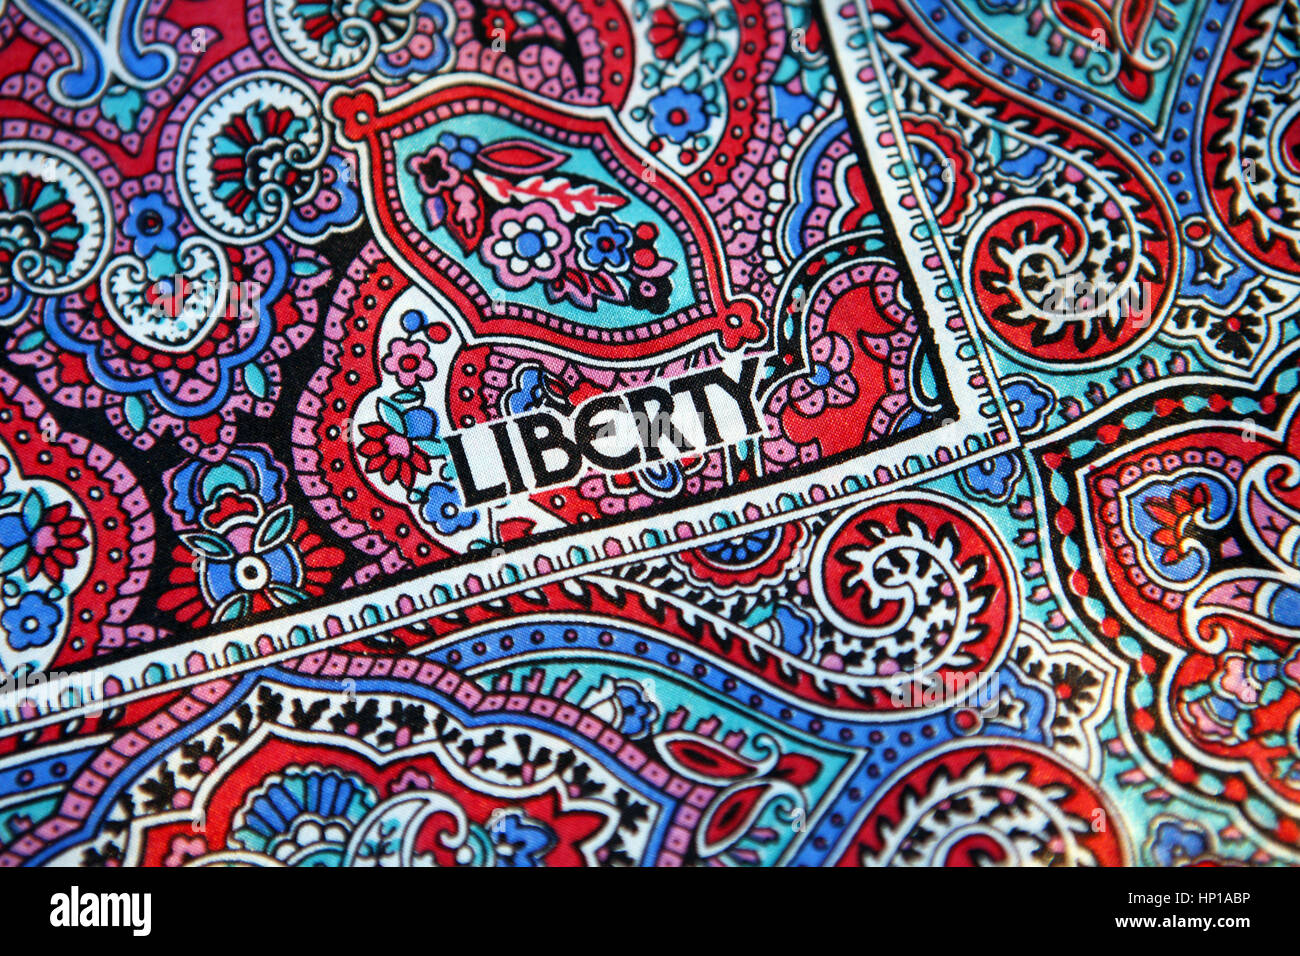 Liberty Paisley Pattern silk scarf from Liberty's London the up market department store. Stock Photo